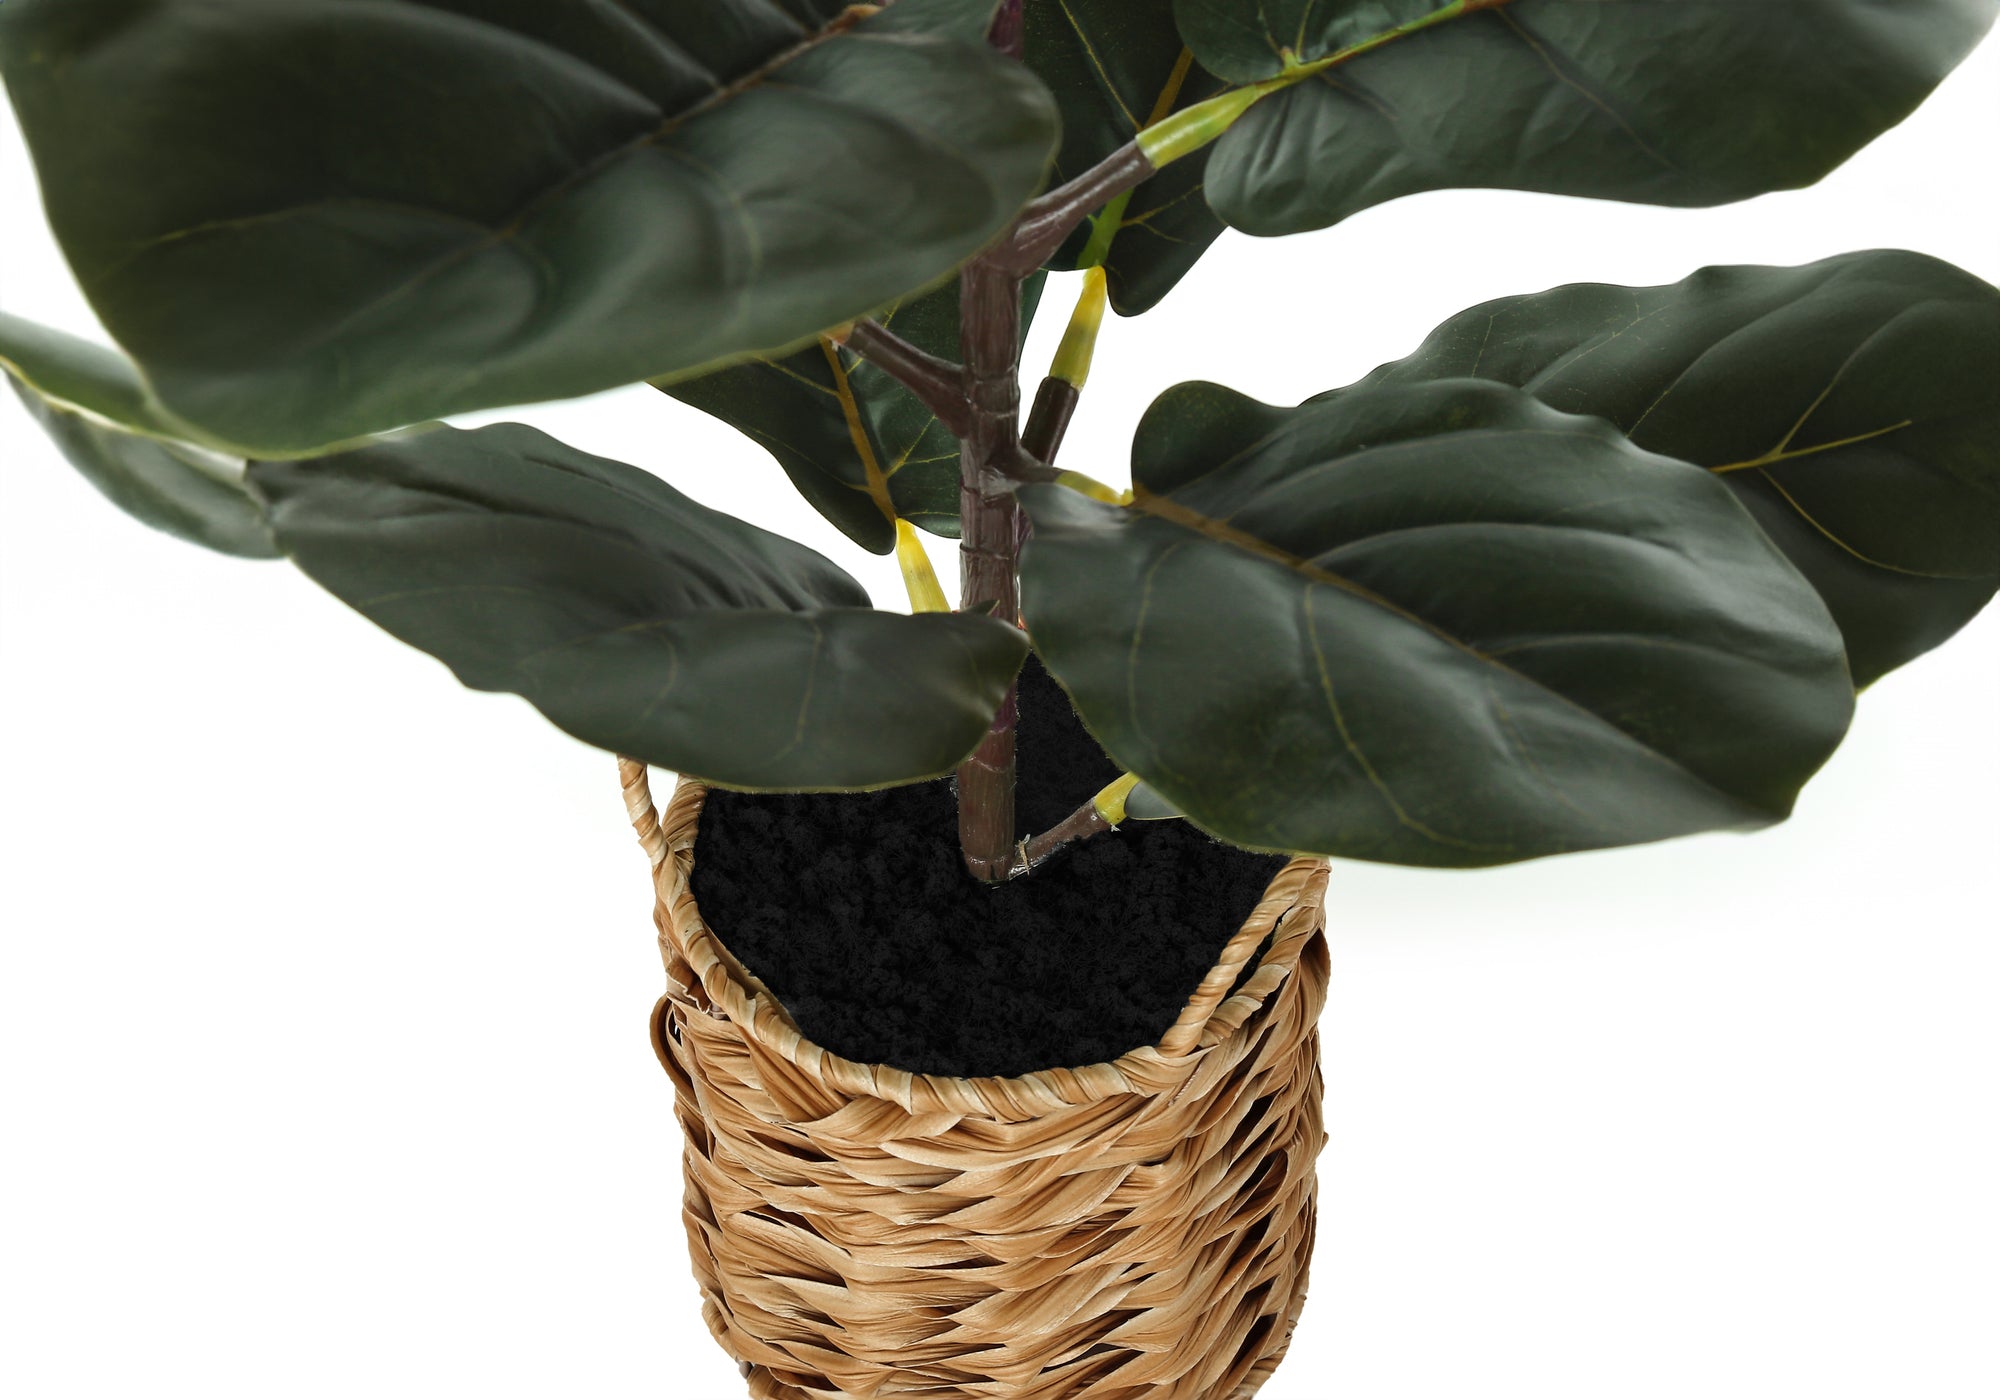 ARTIFICIAL PLANT - 28"H / INDOOR FIDDLE / 8" WOVEN BASKET